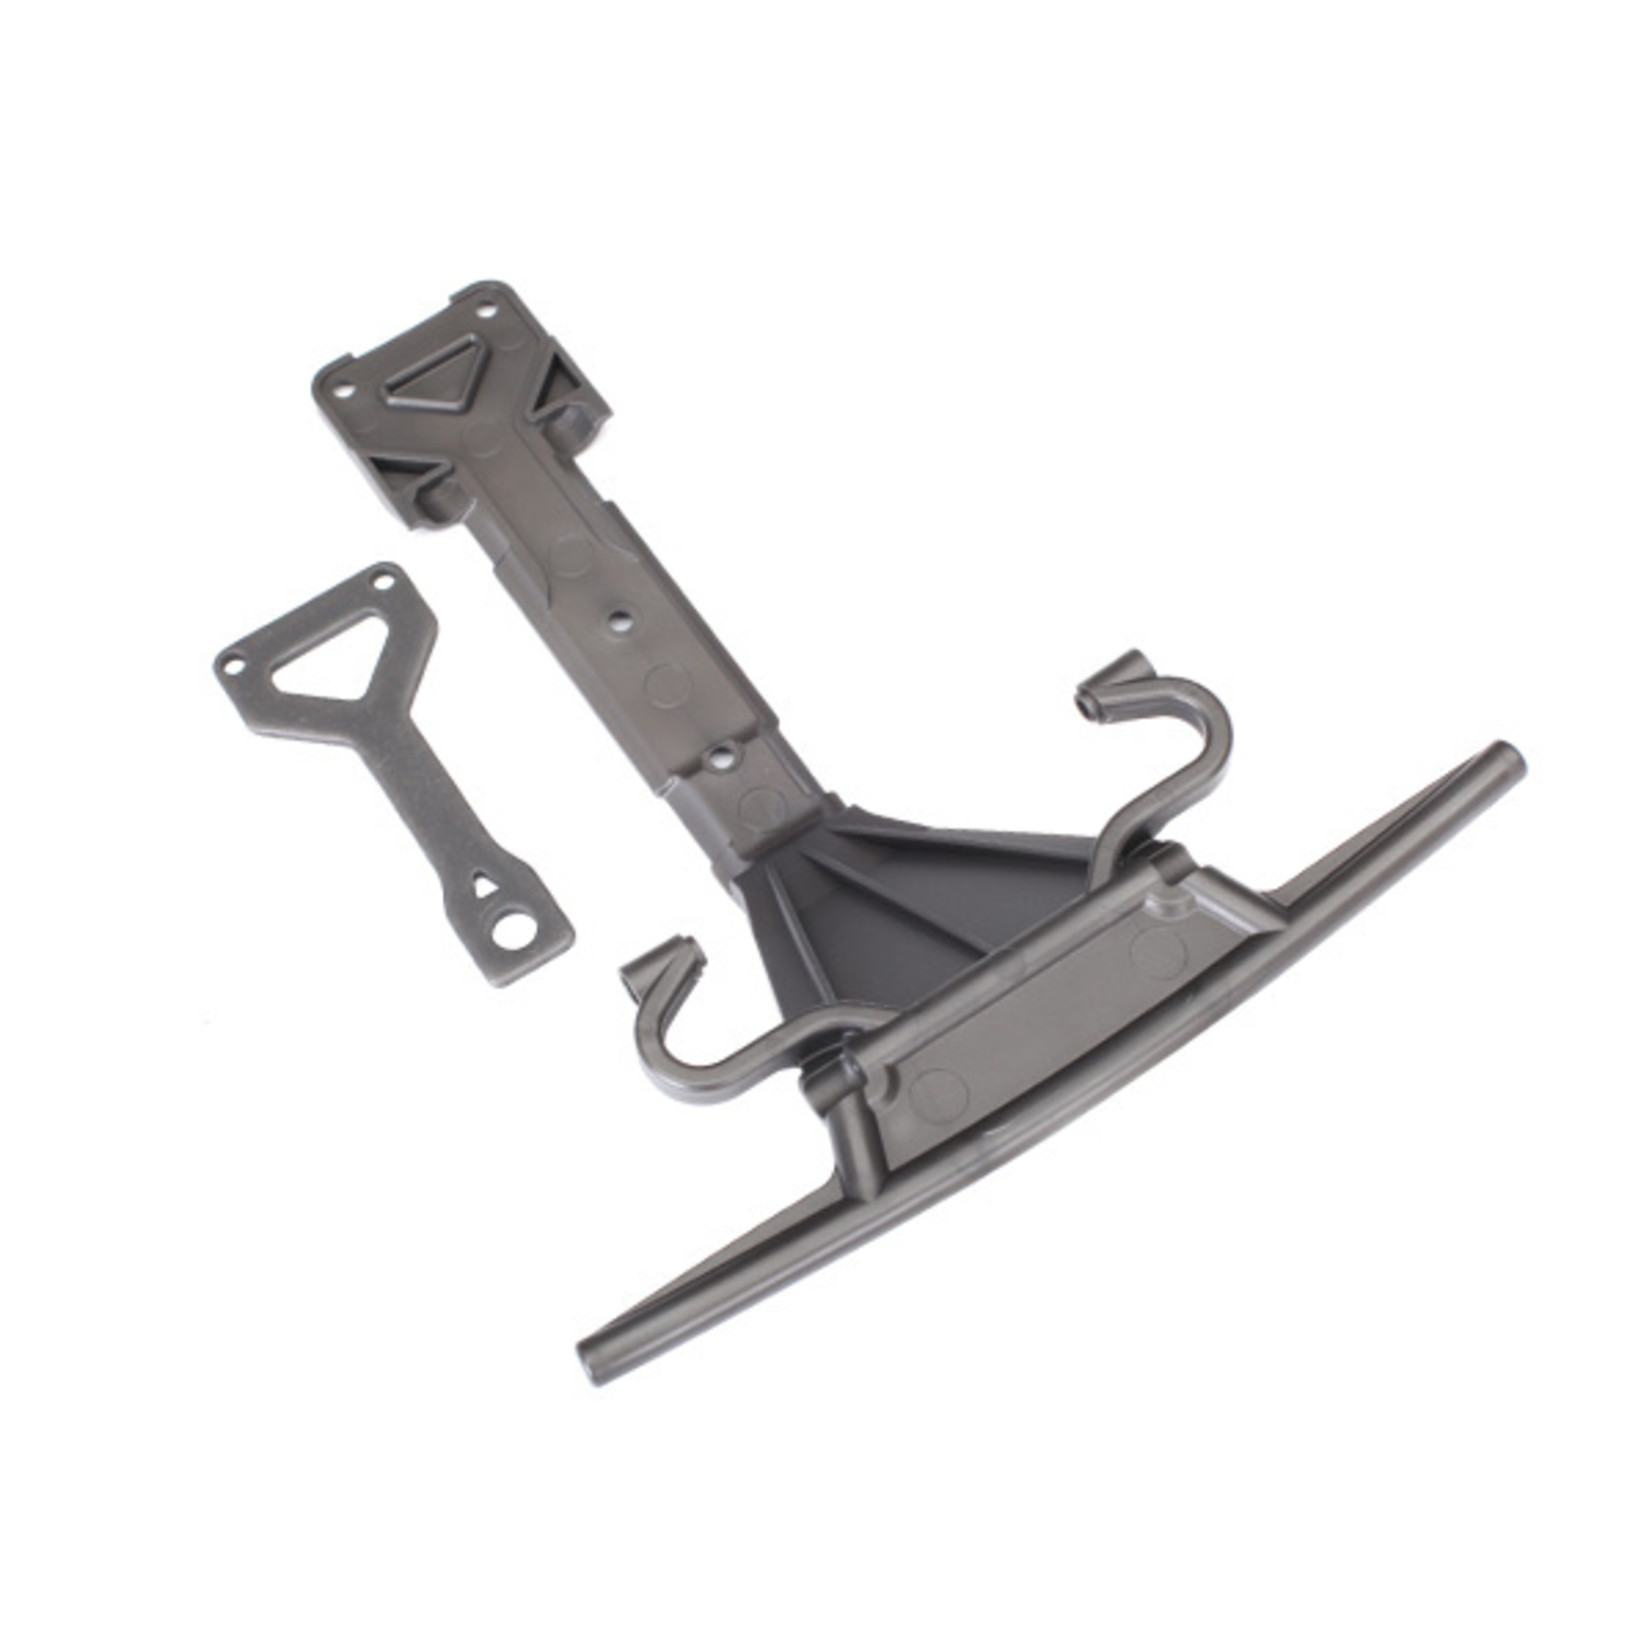 Traxxas 8537 - Skidplate, front (plastic)/ support plate (